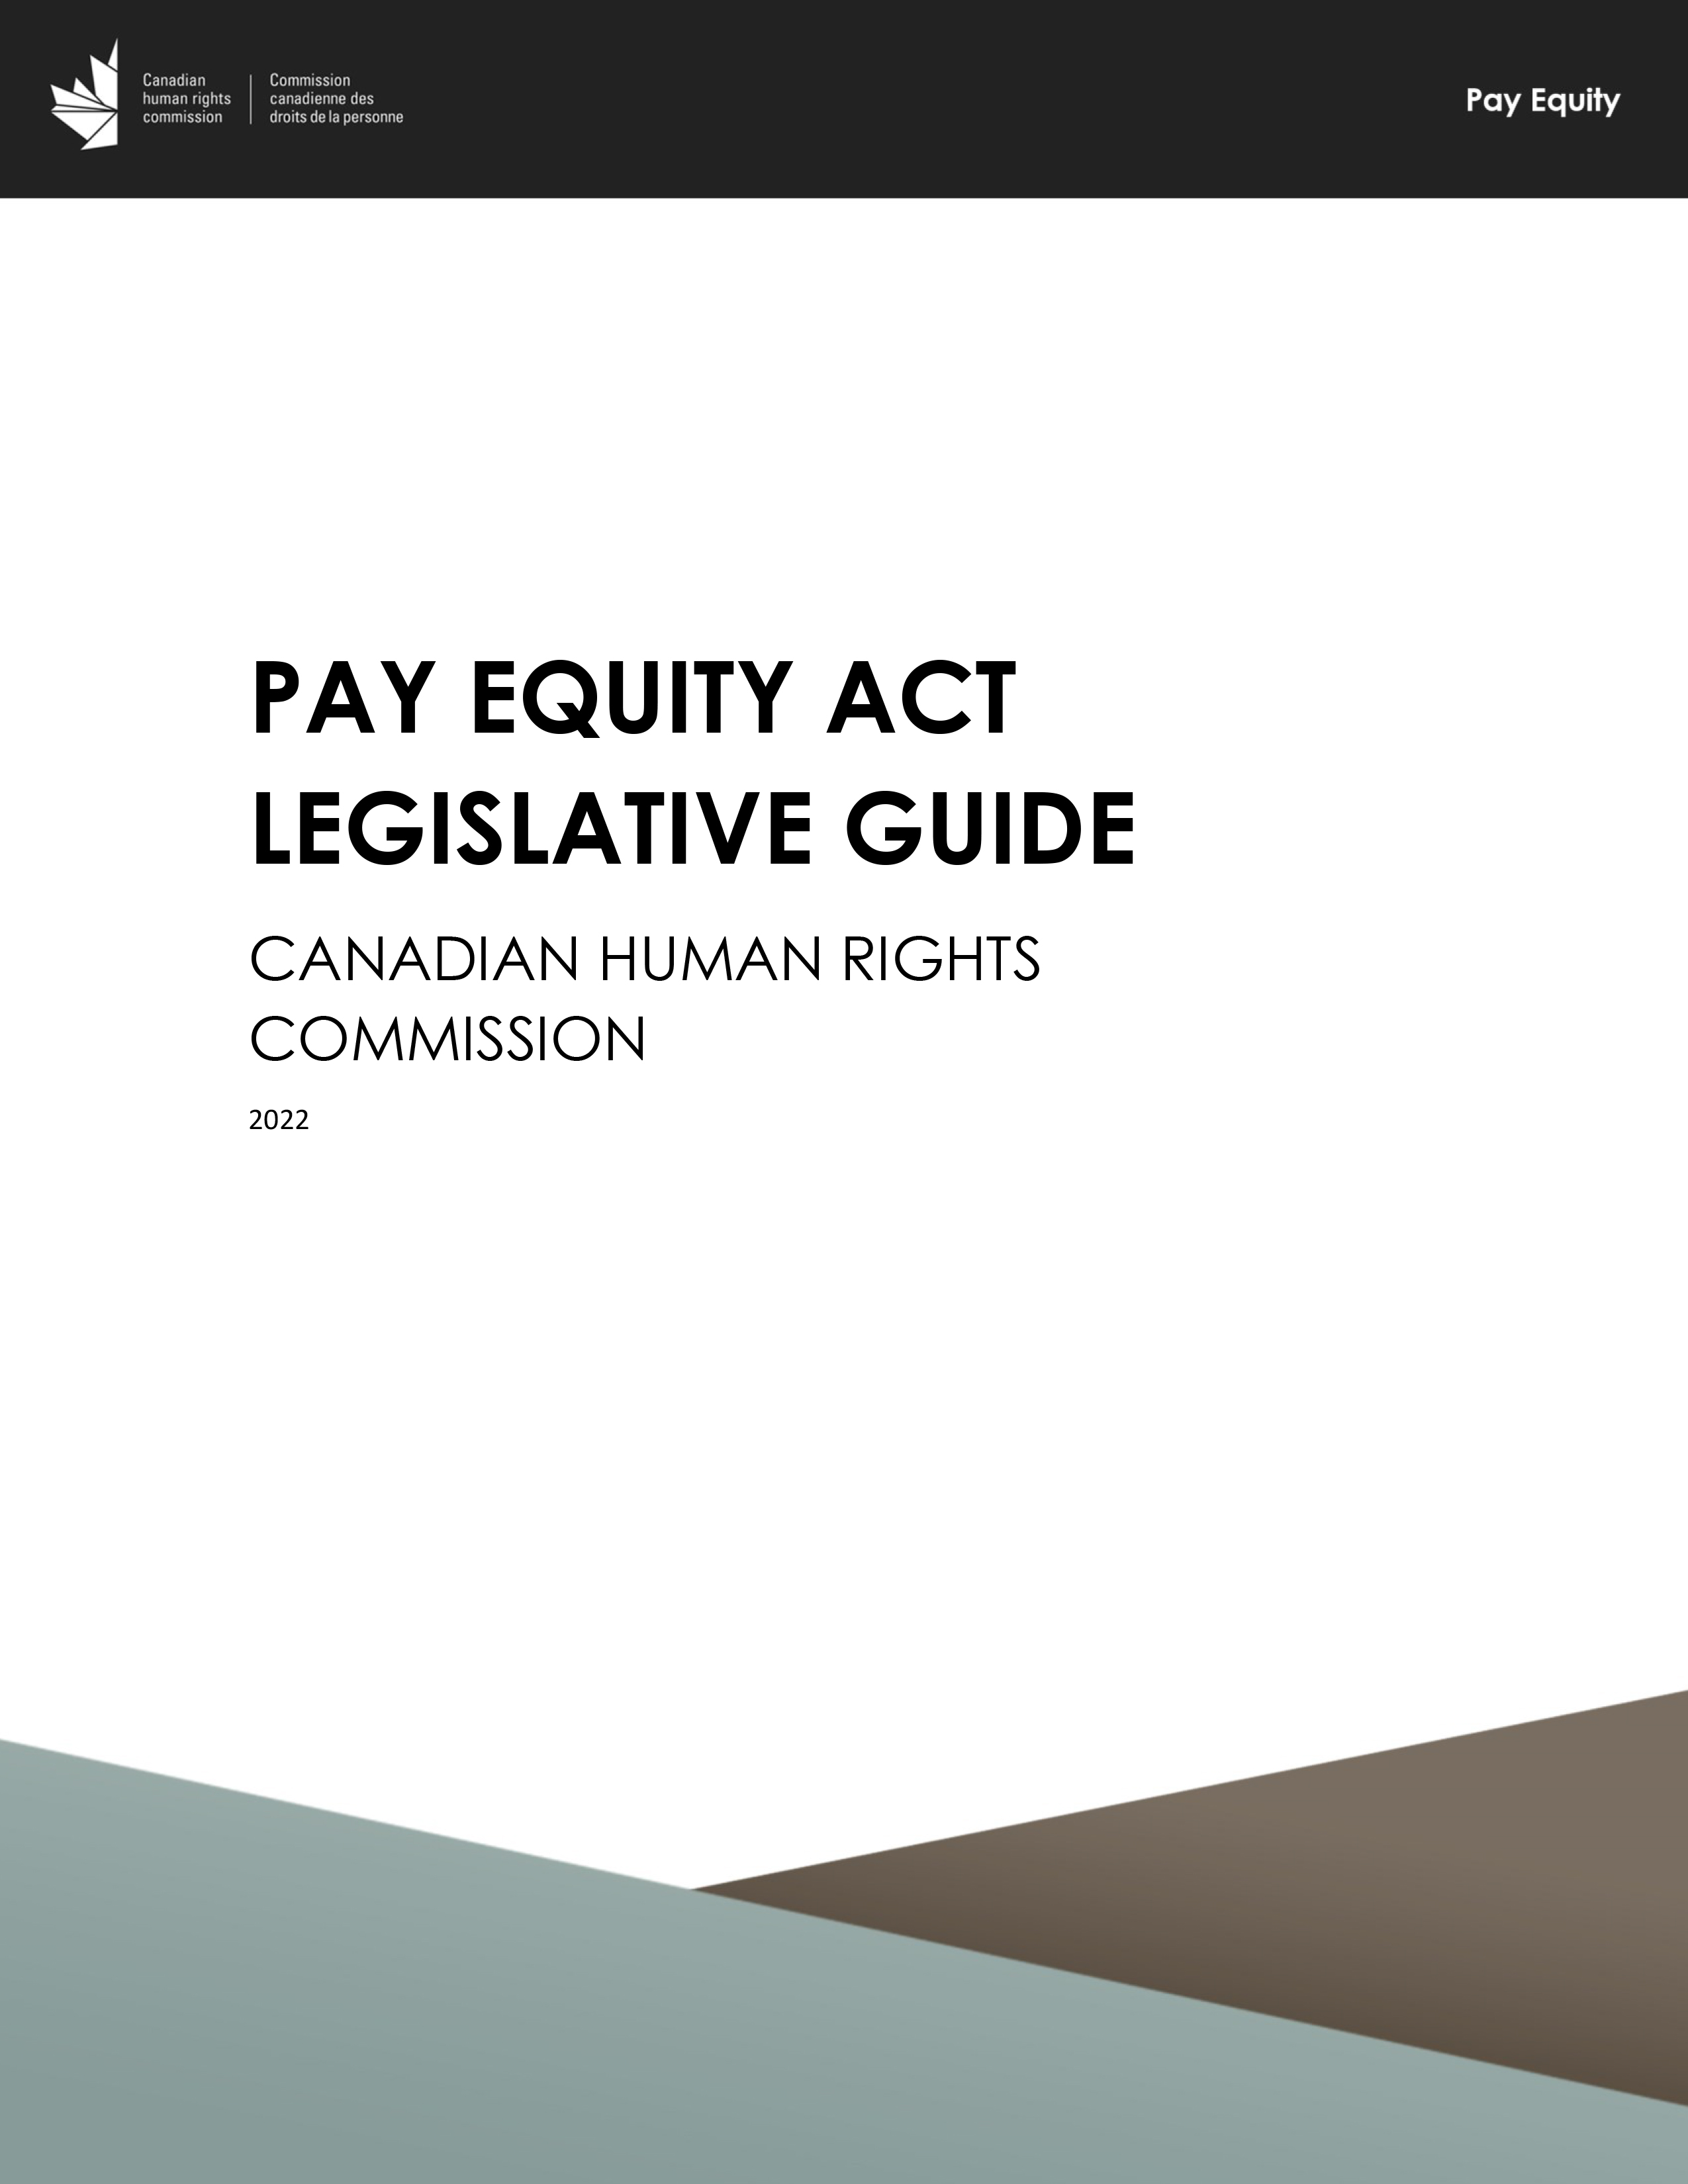 Pay Equity Act Legislative Guide